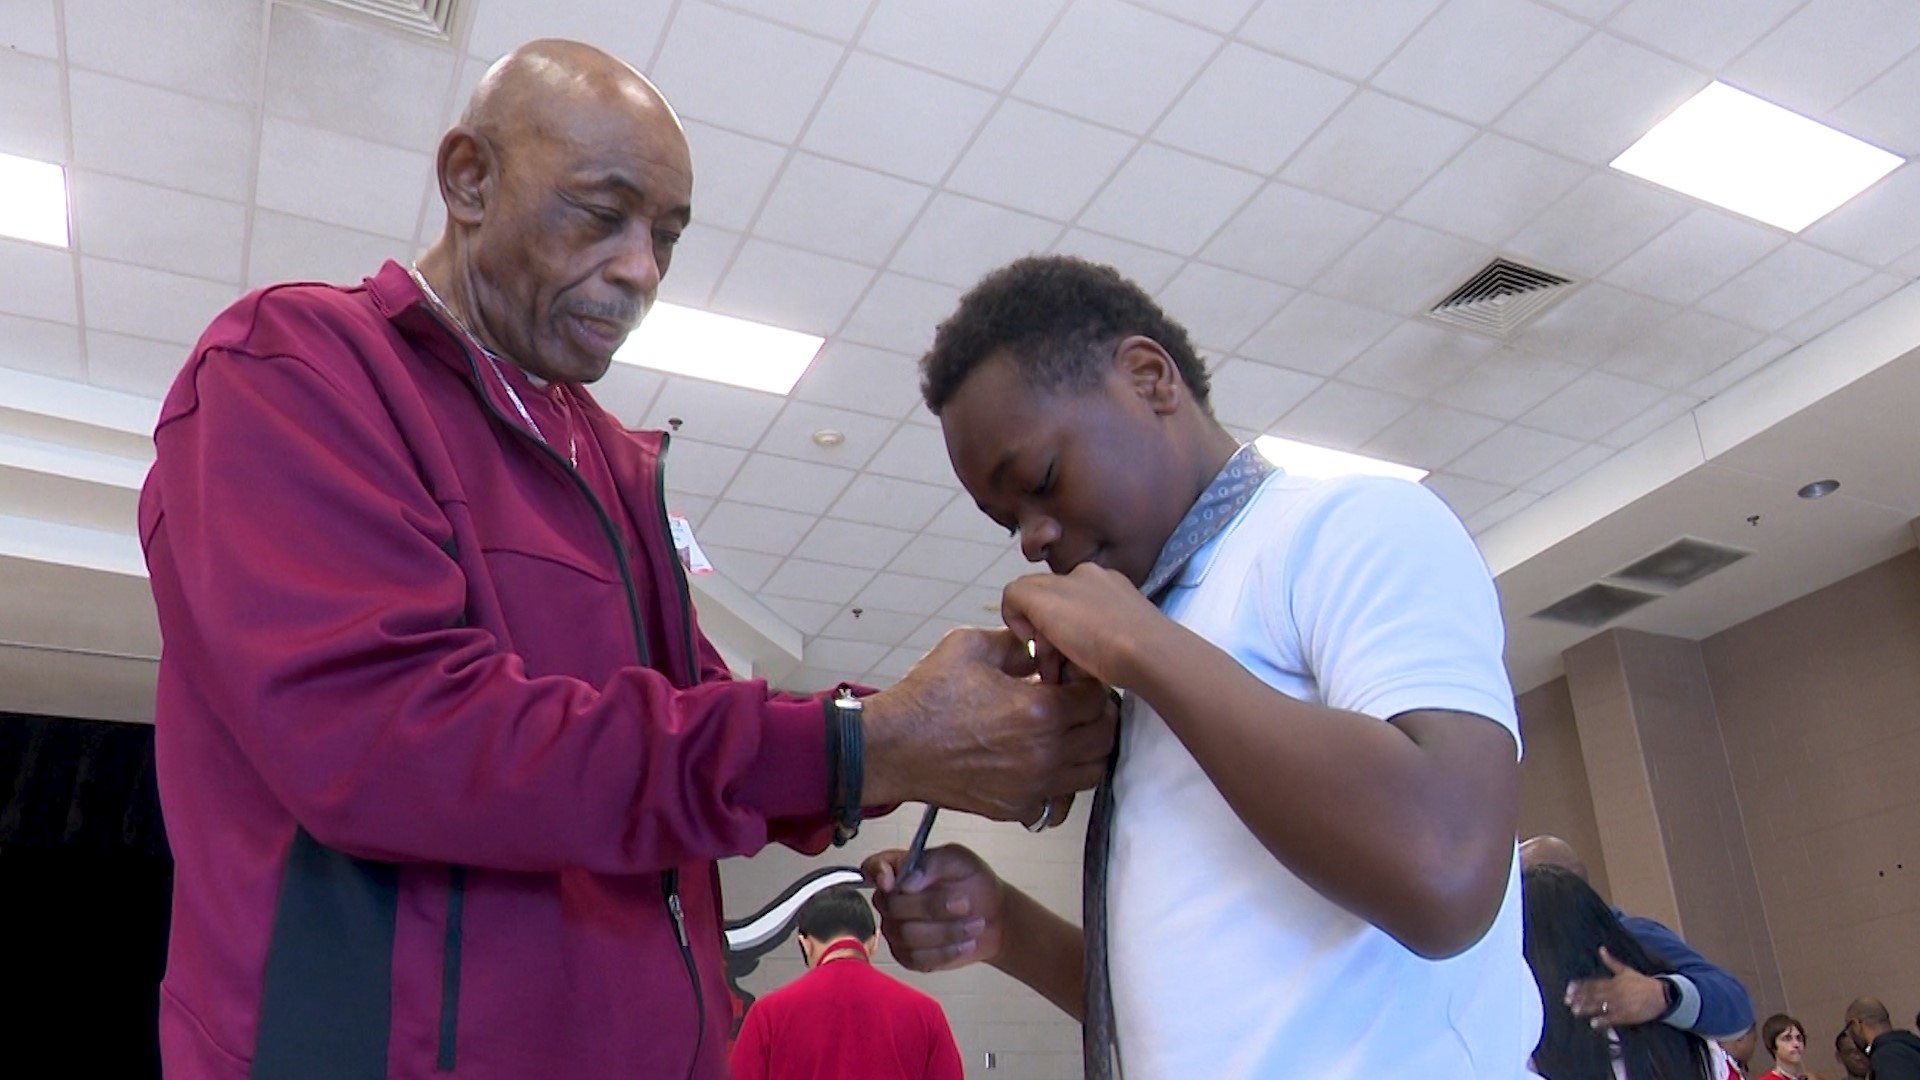 Cedar Hill ISD held its first-ever "Tie Day" event that took place at three schools over three days in a row.